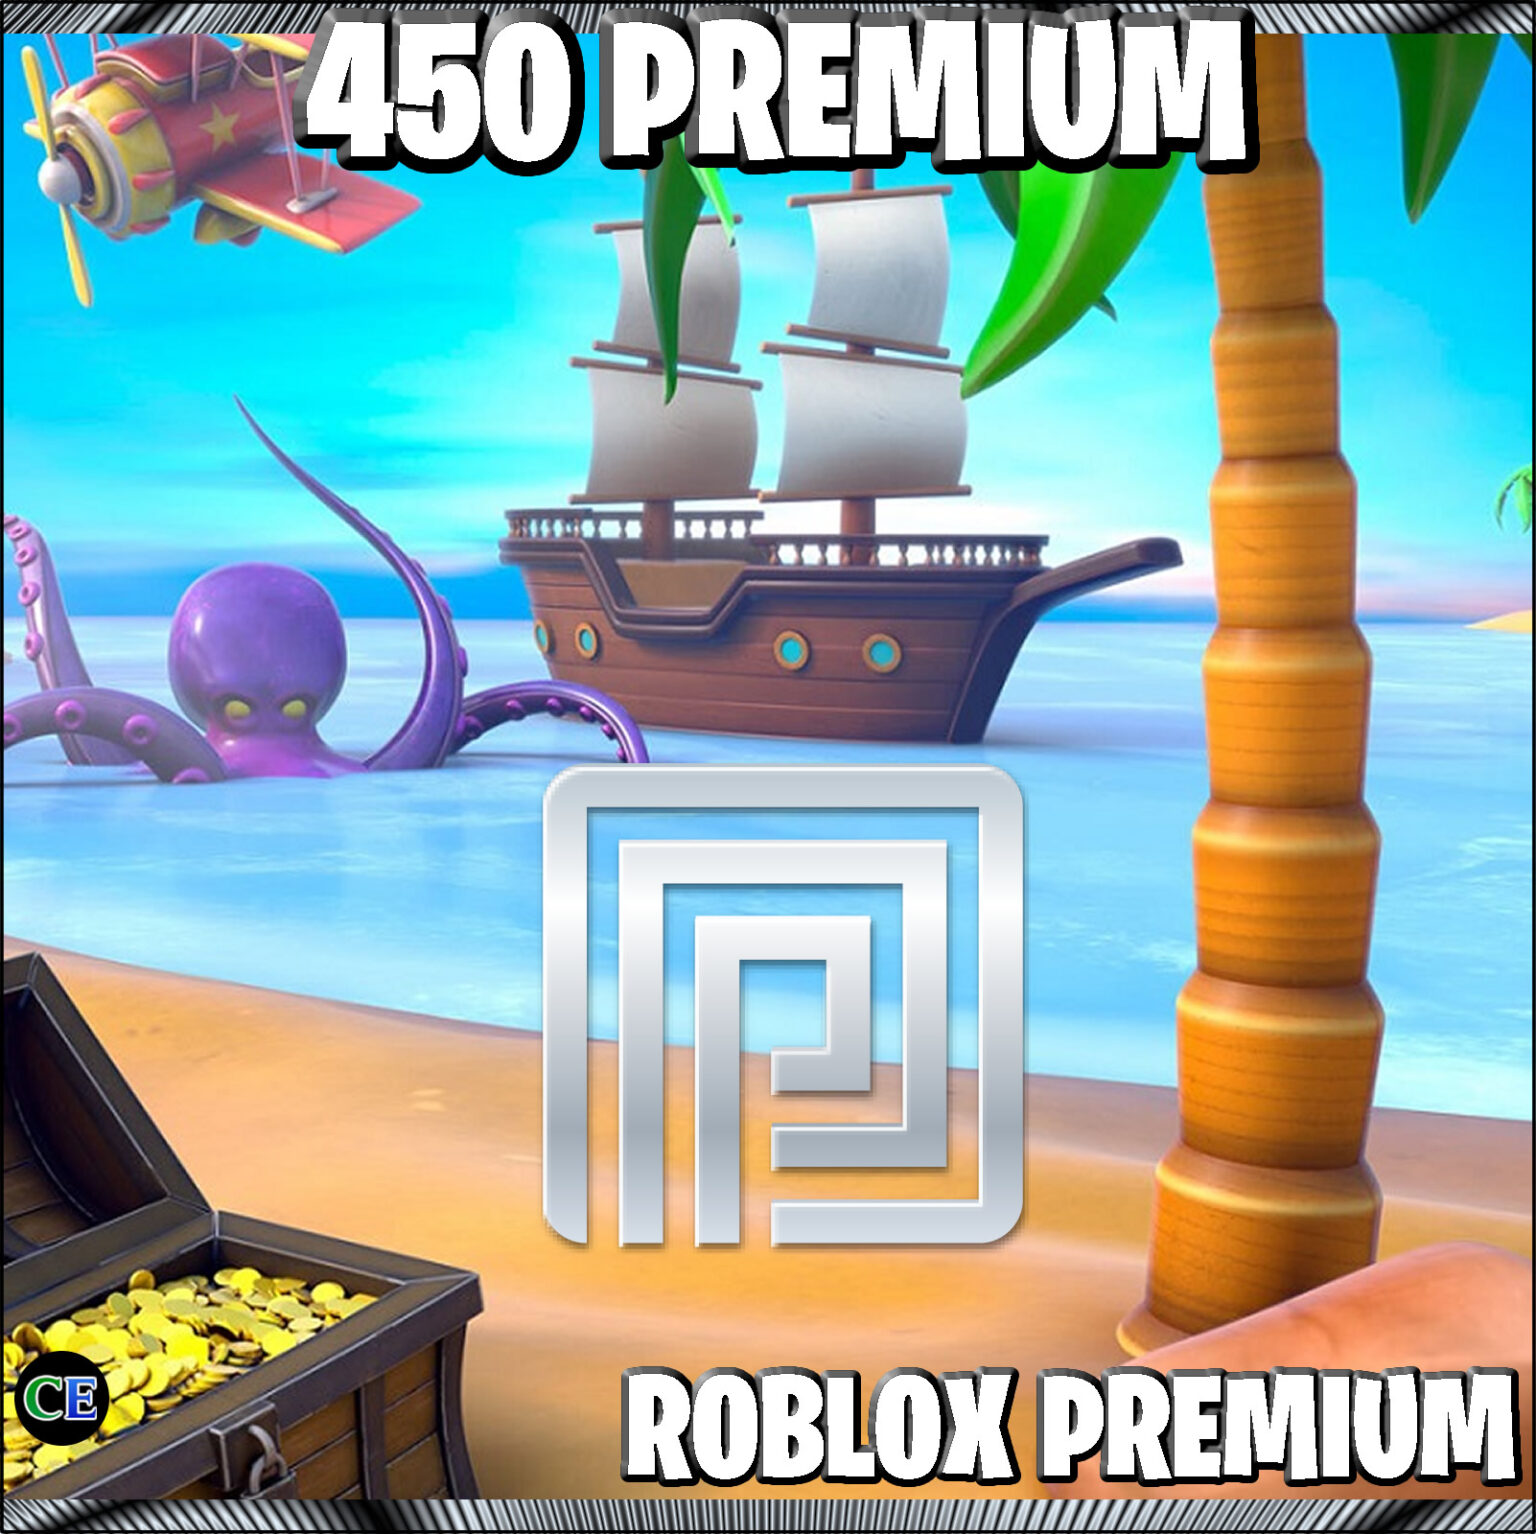 how does roblox premium work